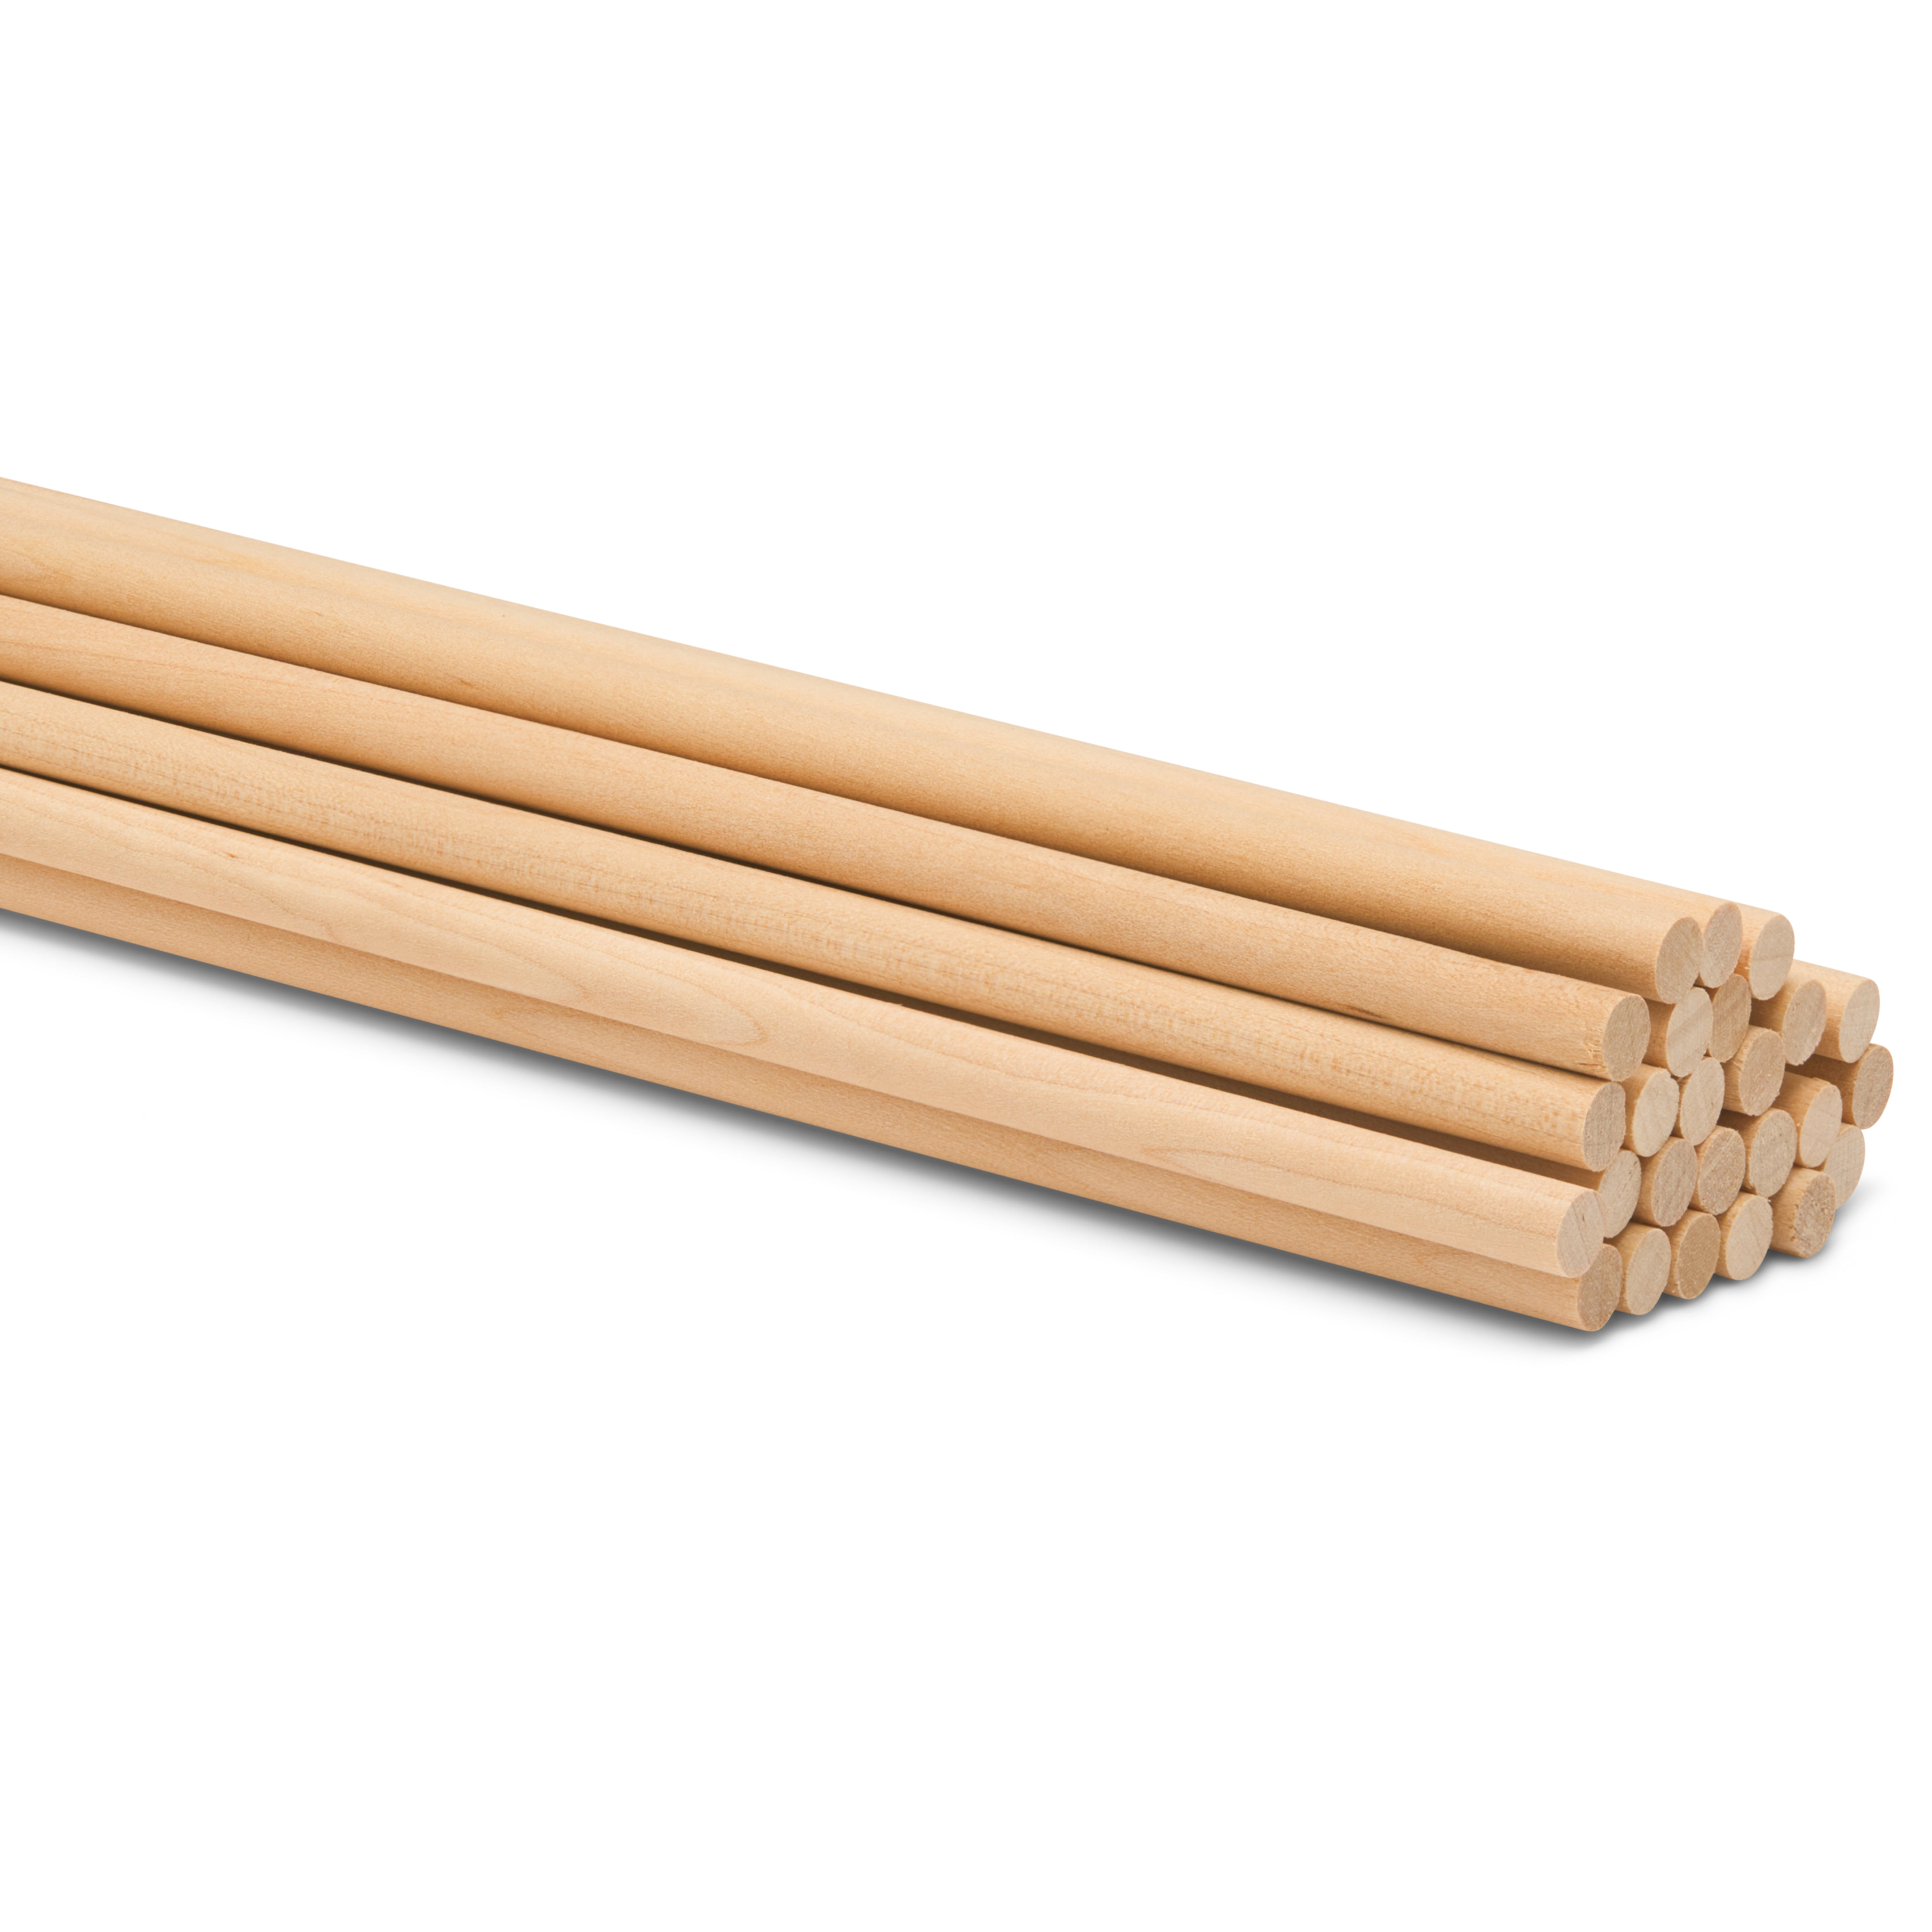 Wood Square Dowel Rods 1/4-Inch x 36 Pack of 10 Wooden Craft Sticks for Crafts and Woodworking by Woodpeckers